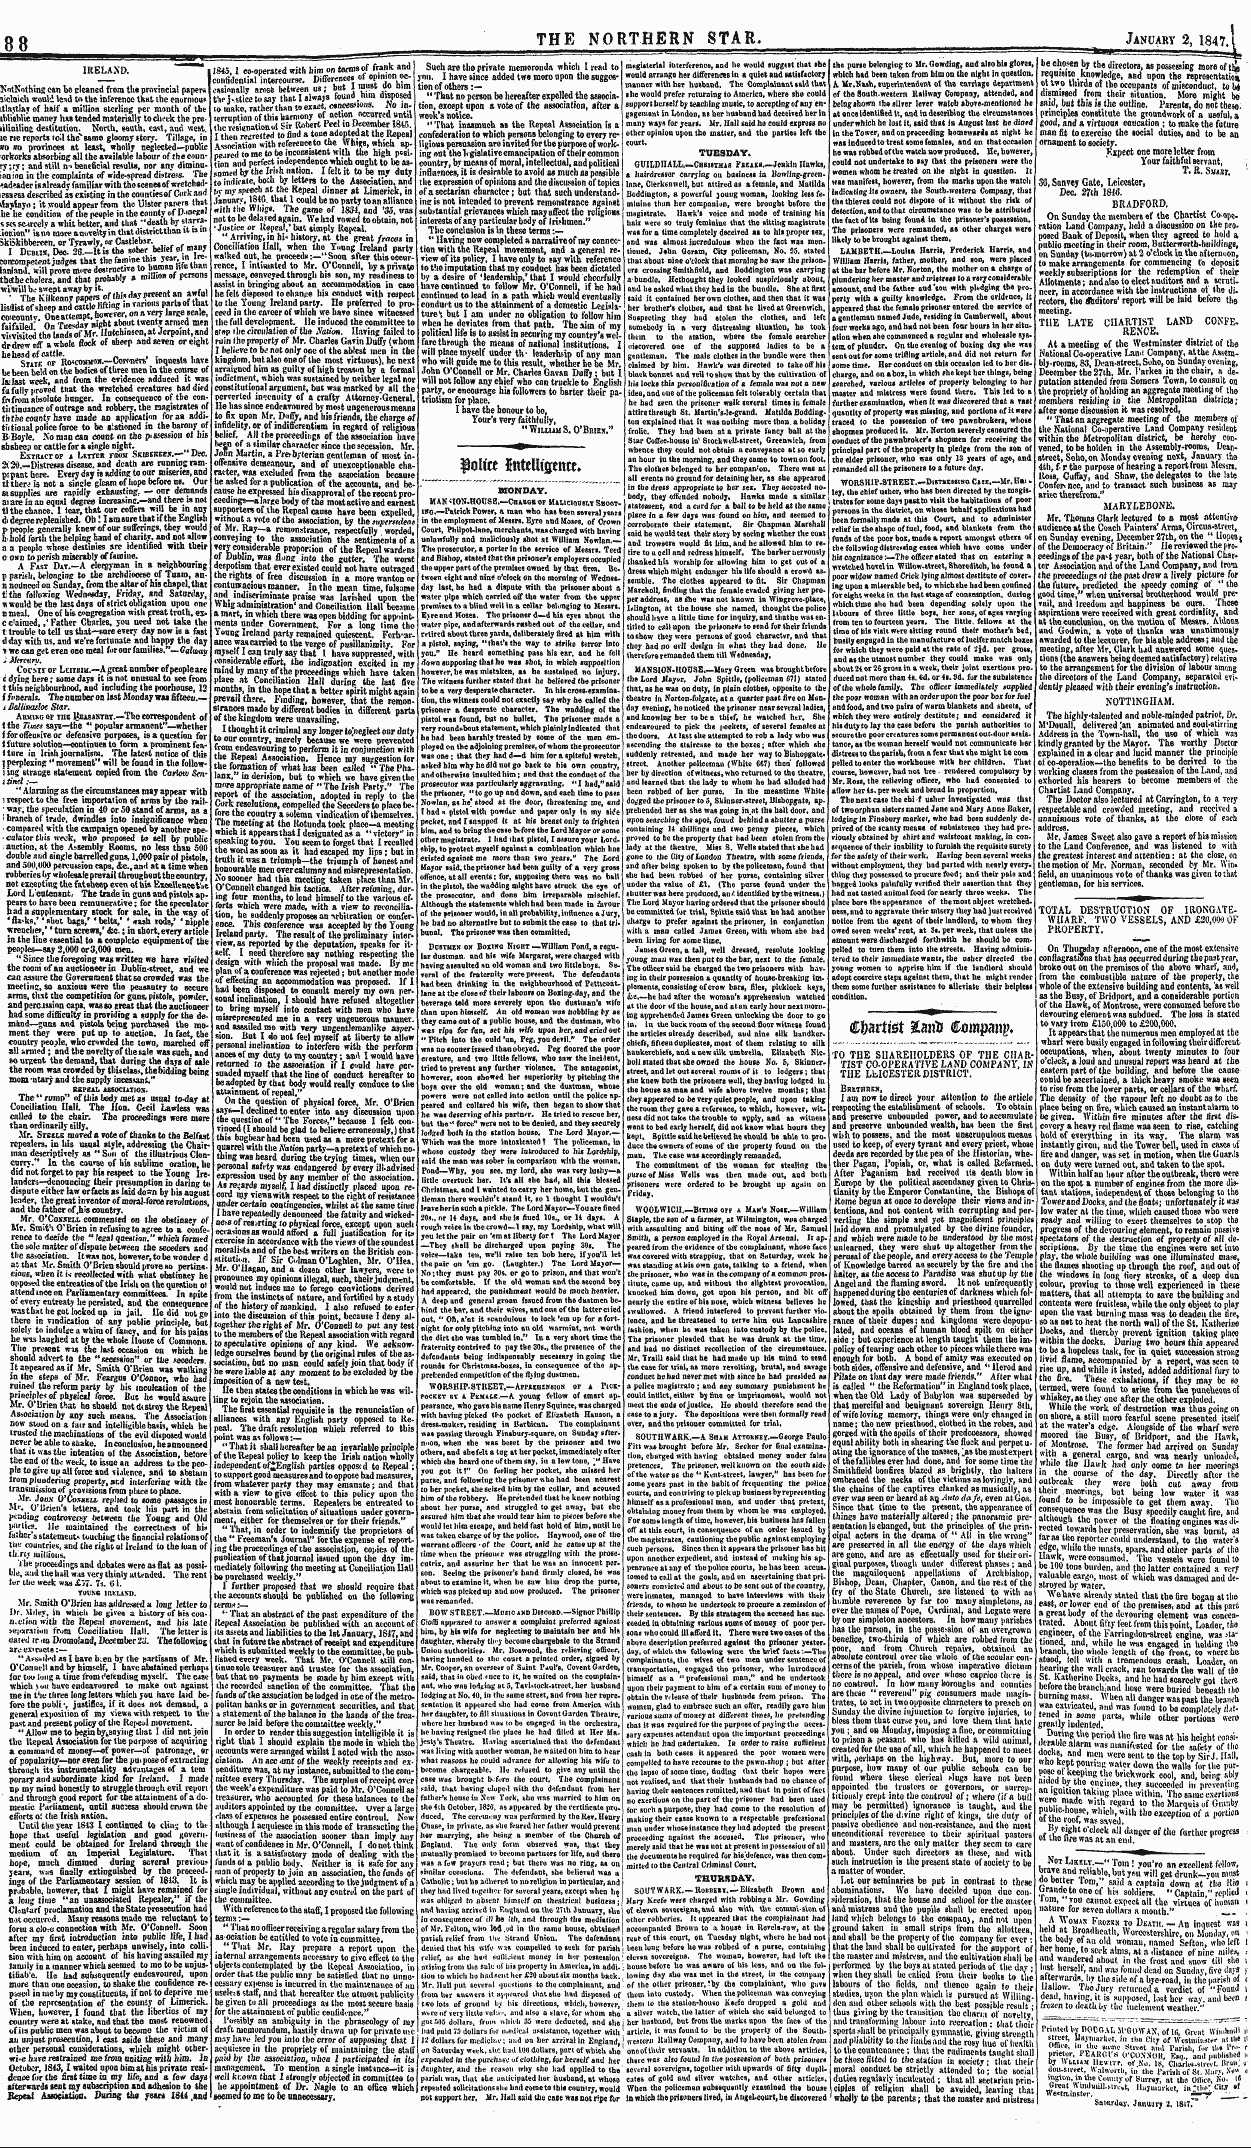 Northern Star (1837-1852): jS F Y, 2nd edition - G The Northern Star. January 2, 1847.1